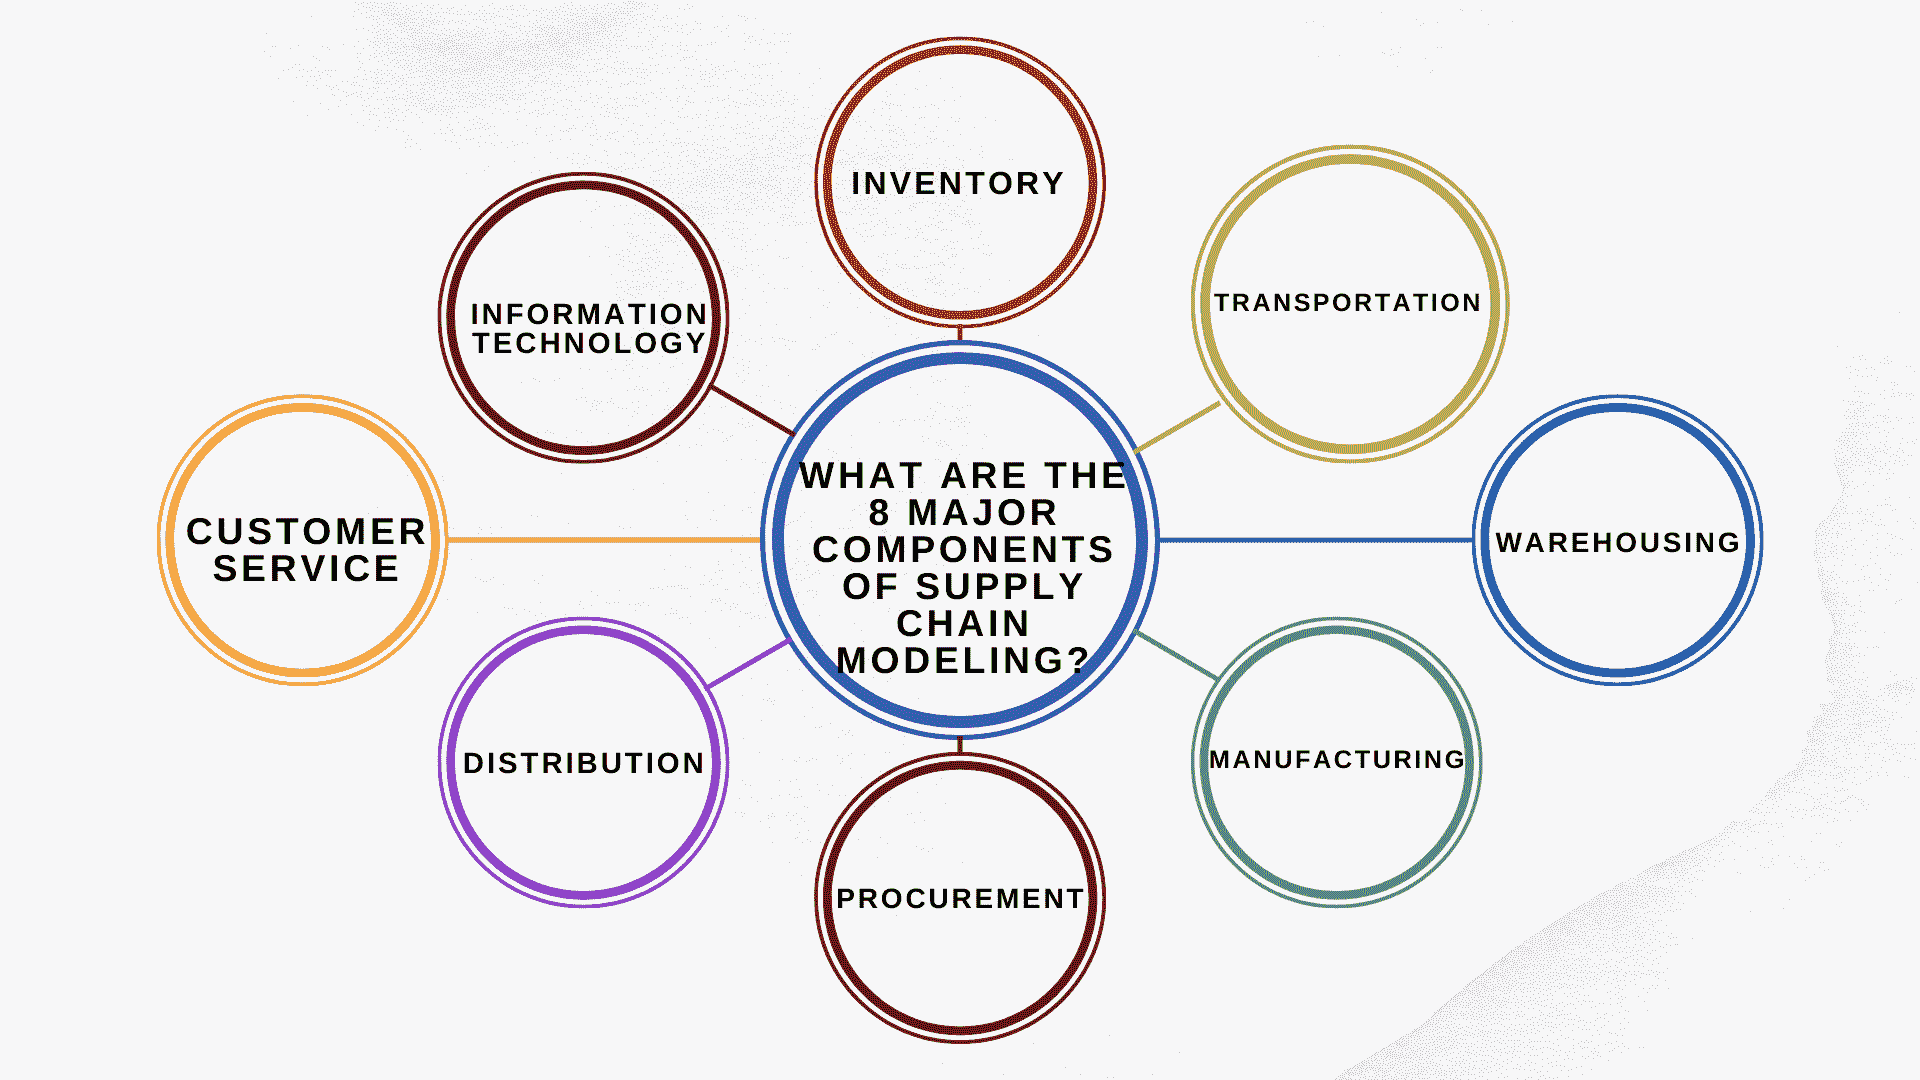 what are the 8 major components of supply chain modeling?